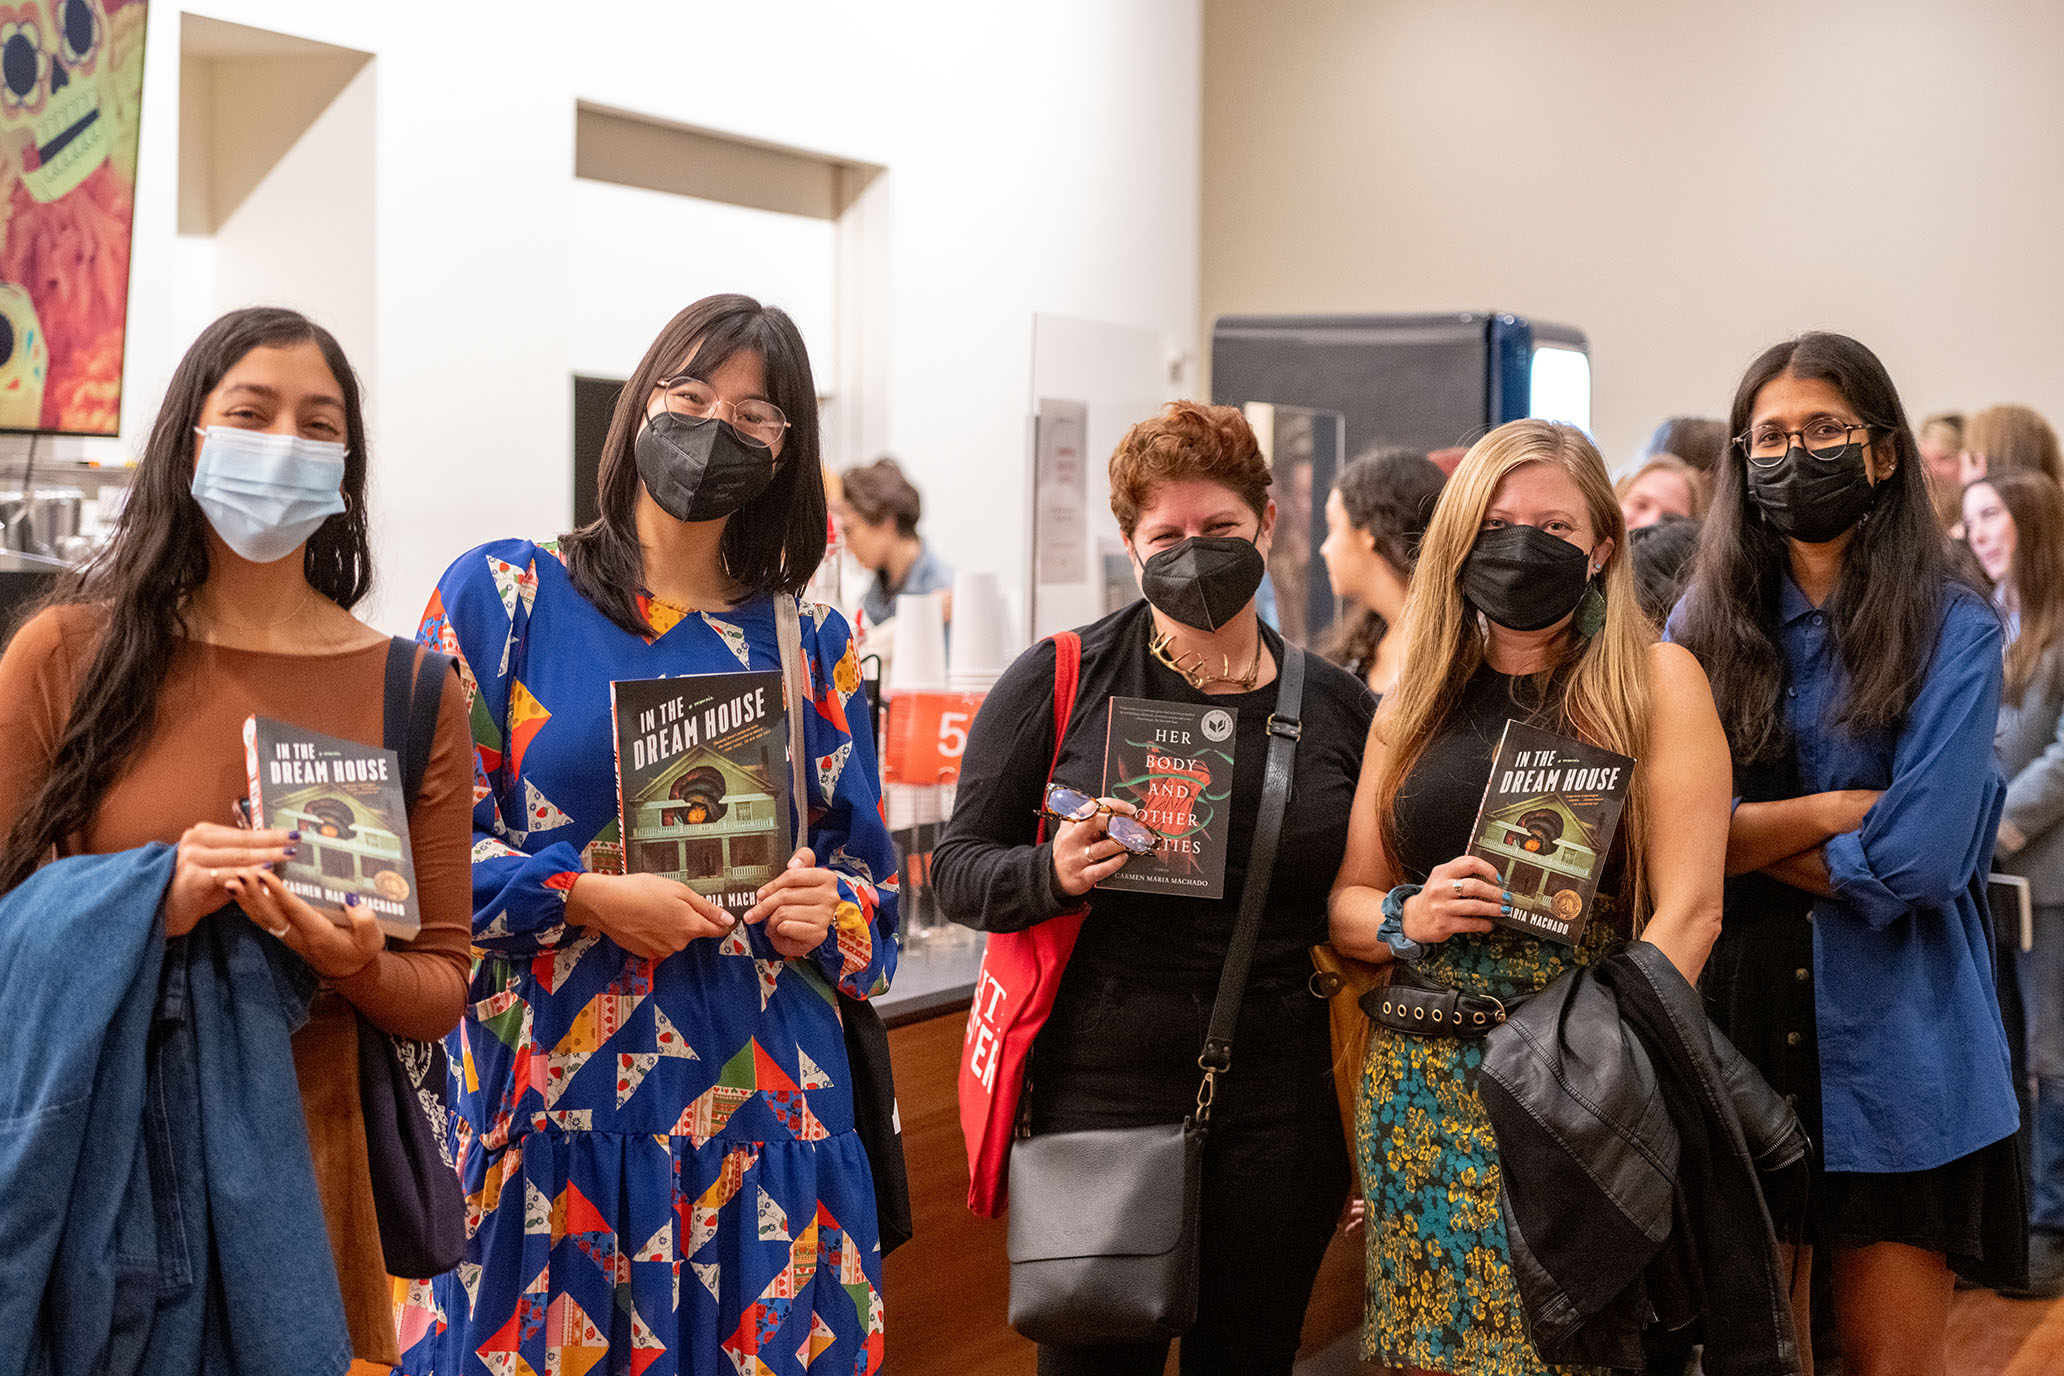 5 women wearing black face masks stand in front of the camera smiling. 3 women are holding the book "In the Dream House" and one is holding the book "Her Body and Other Parties".